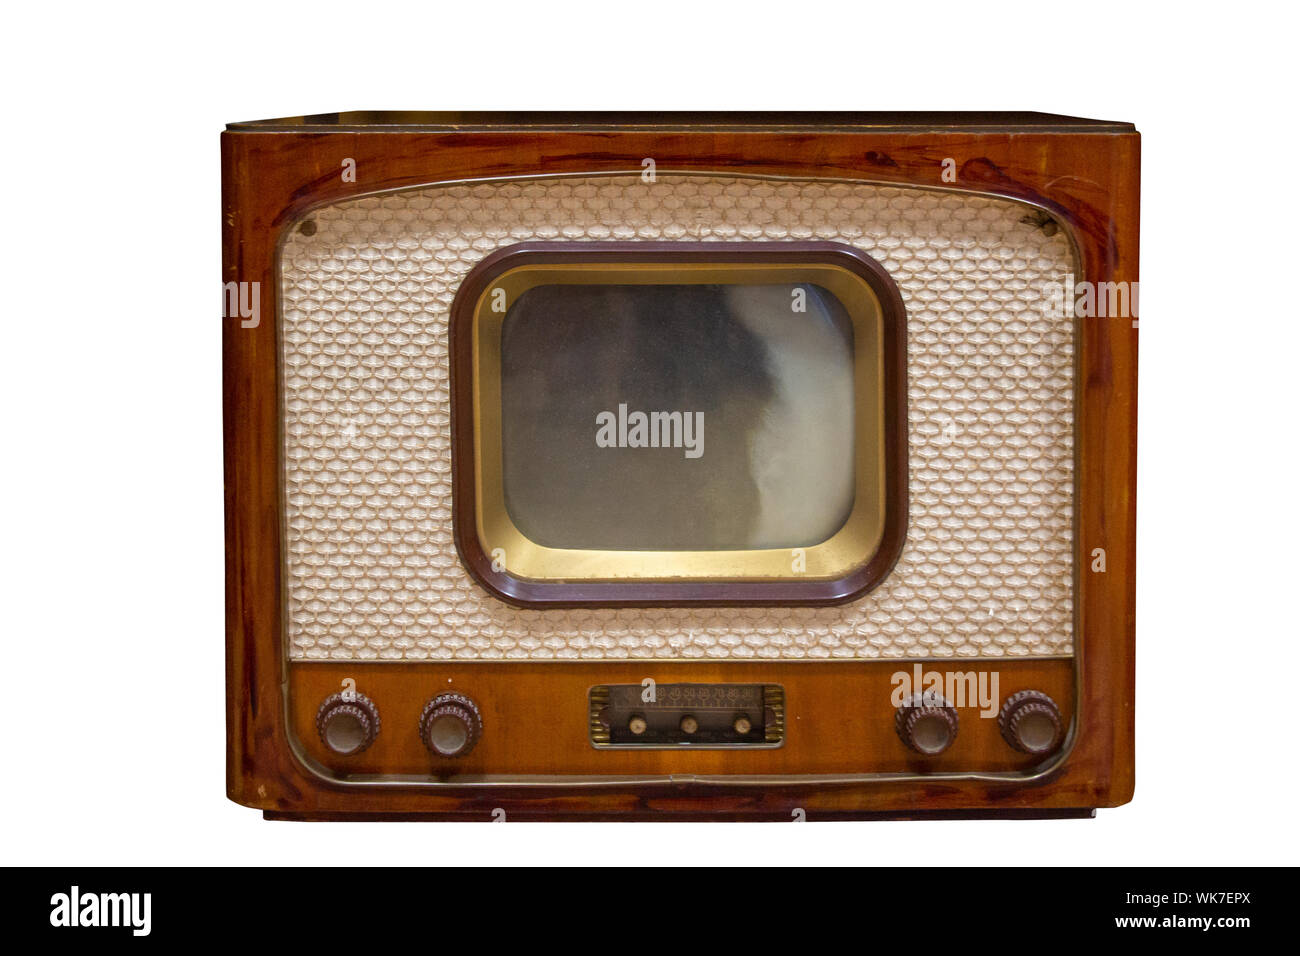 Vintage Television  Old Tv Isolated on White Background. Old-fashioned Television Close Up. Old Grungy Vintage Tv Retro Technology. Stock Photo